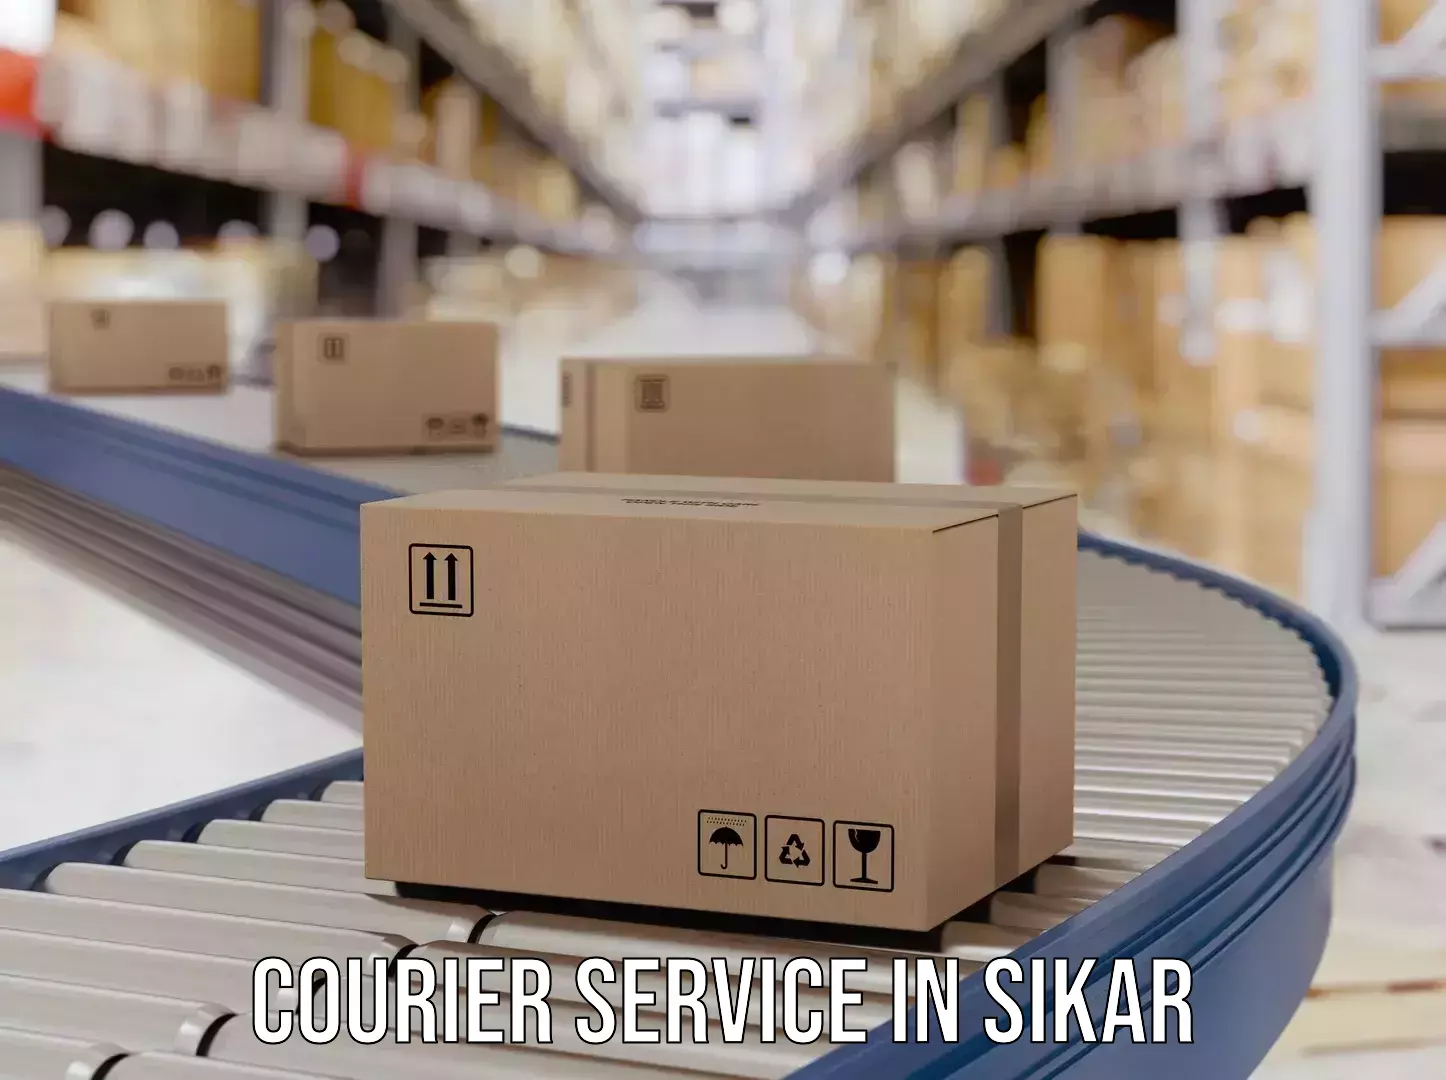 Flexible delivery schedules in Sikar